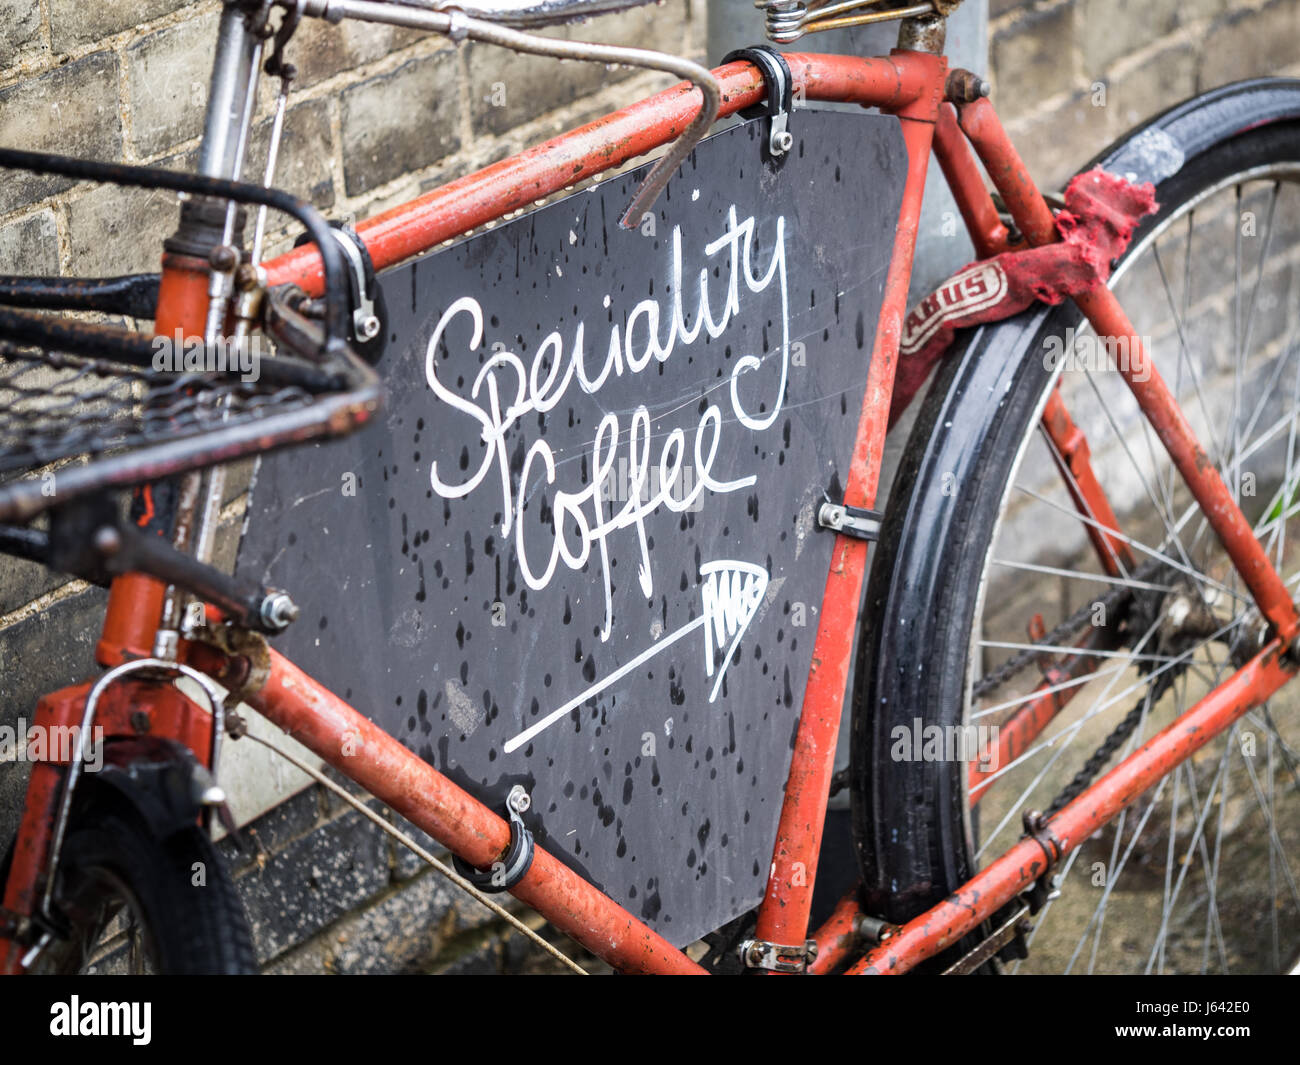 A working bike doubles up as an advert for the Hot Numbers cafe off Mill Road in Cambridge, UK Stock Photo